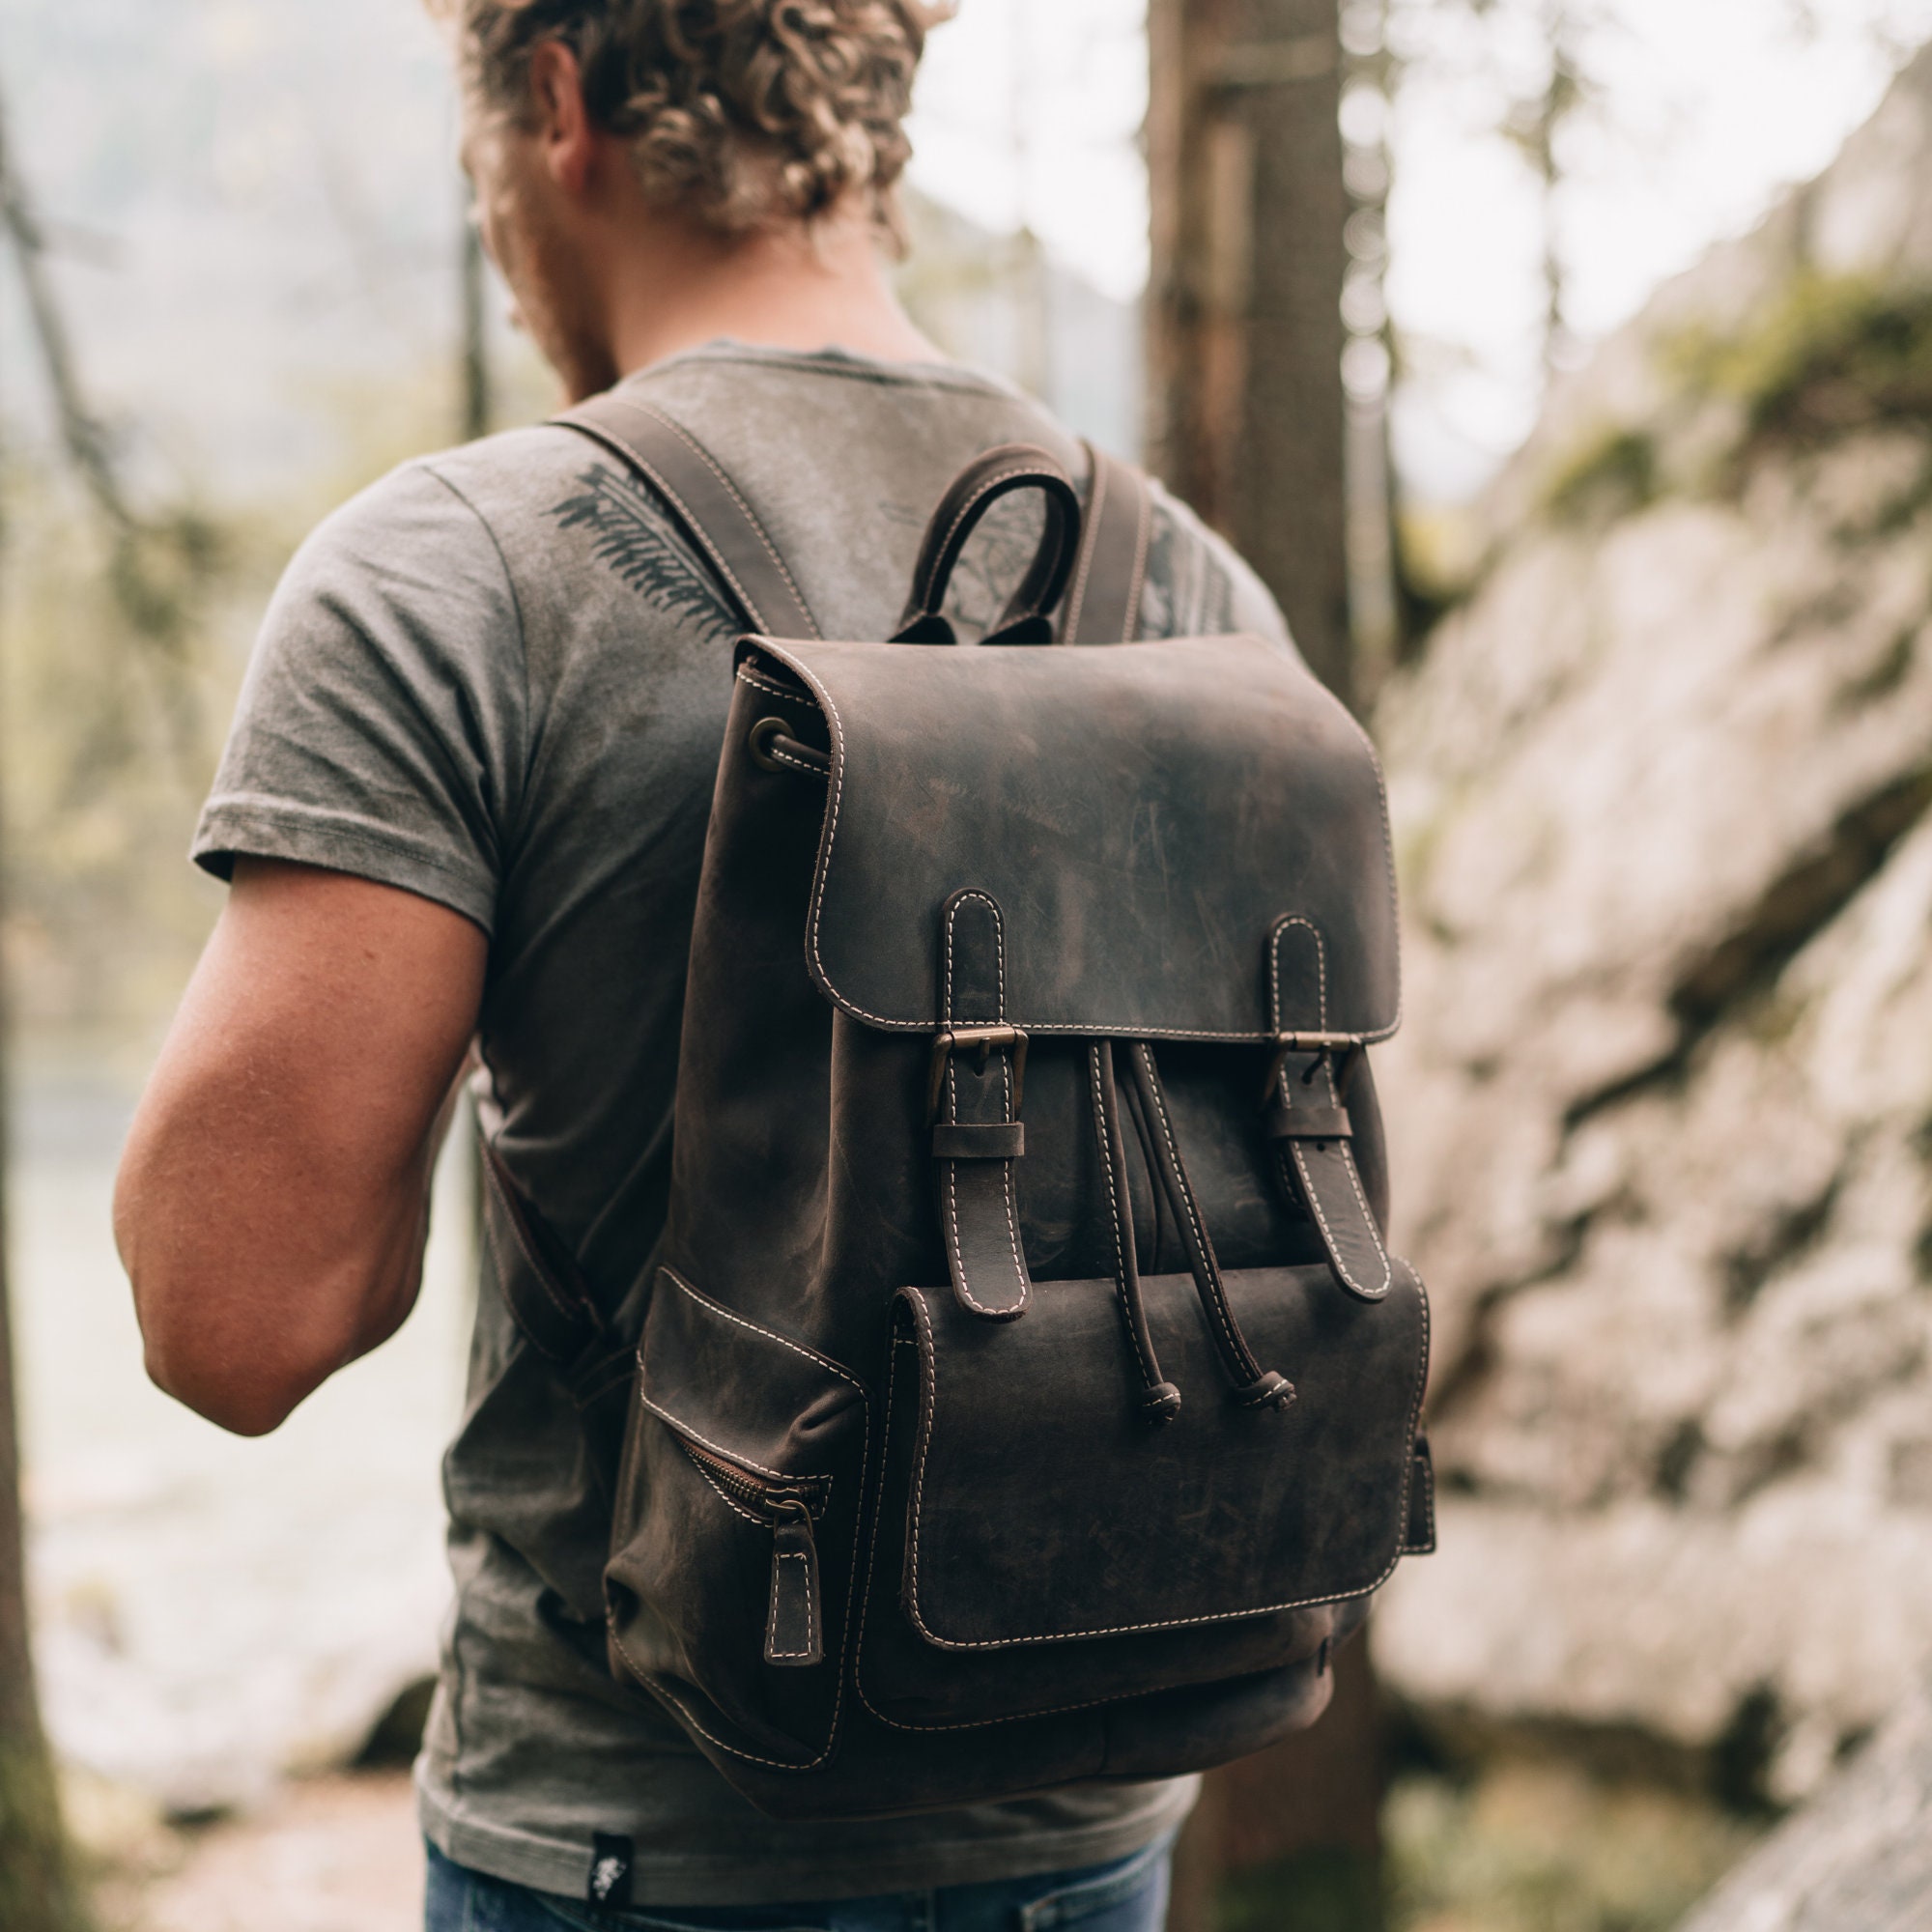 Handcrafted Top Grain Leather Backpack, Weather-resistant Hiking